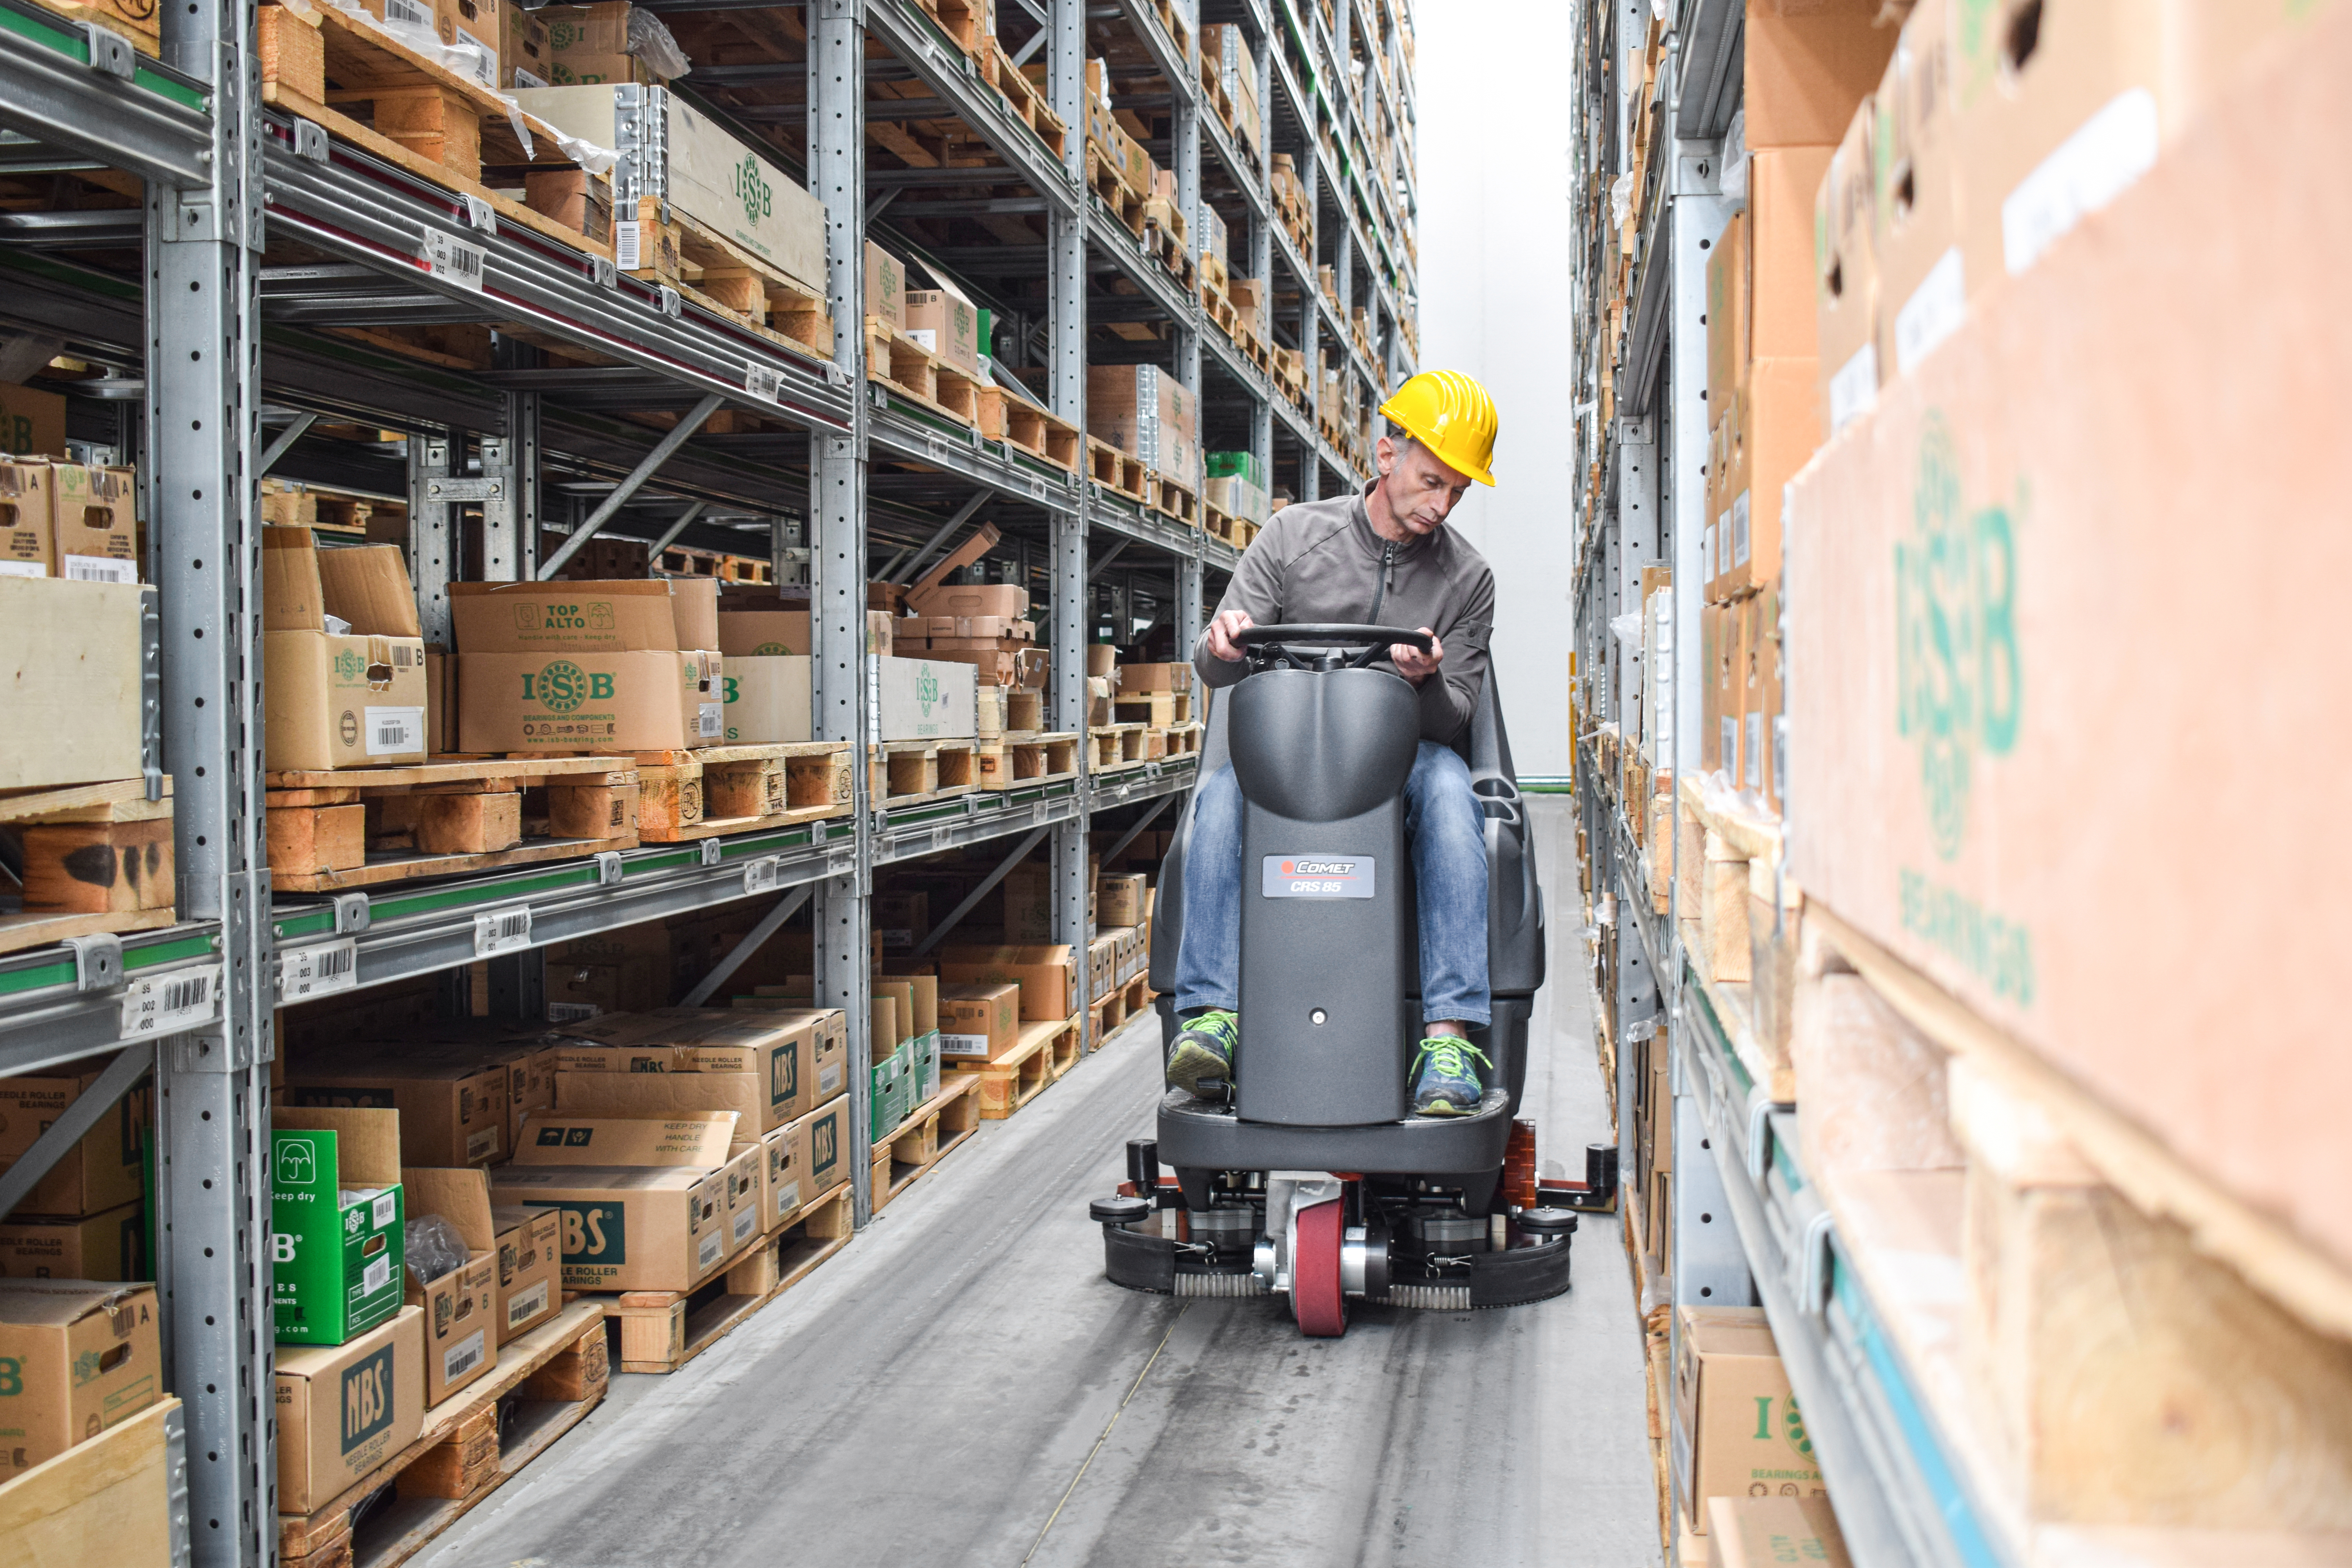 Vacuum cleaner, sweeper or floor scrubber dryer? The guide for choosing a machine for floor care in the warehouse